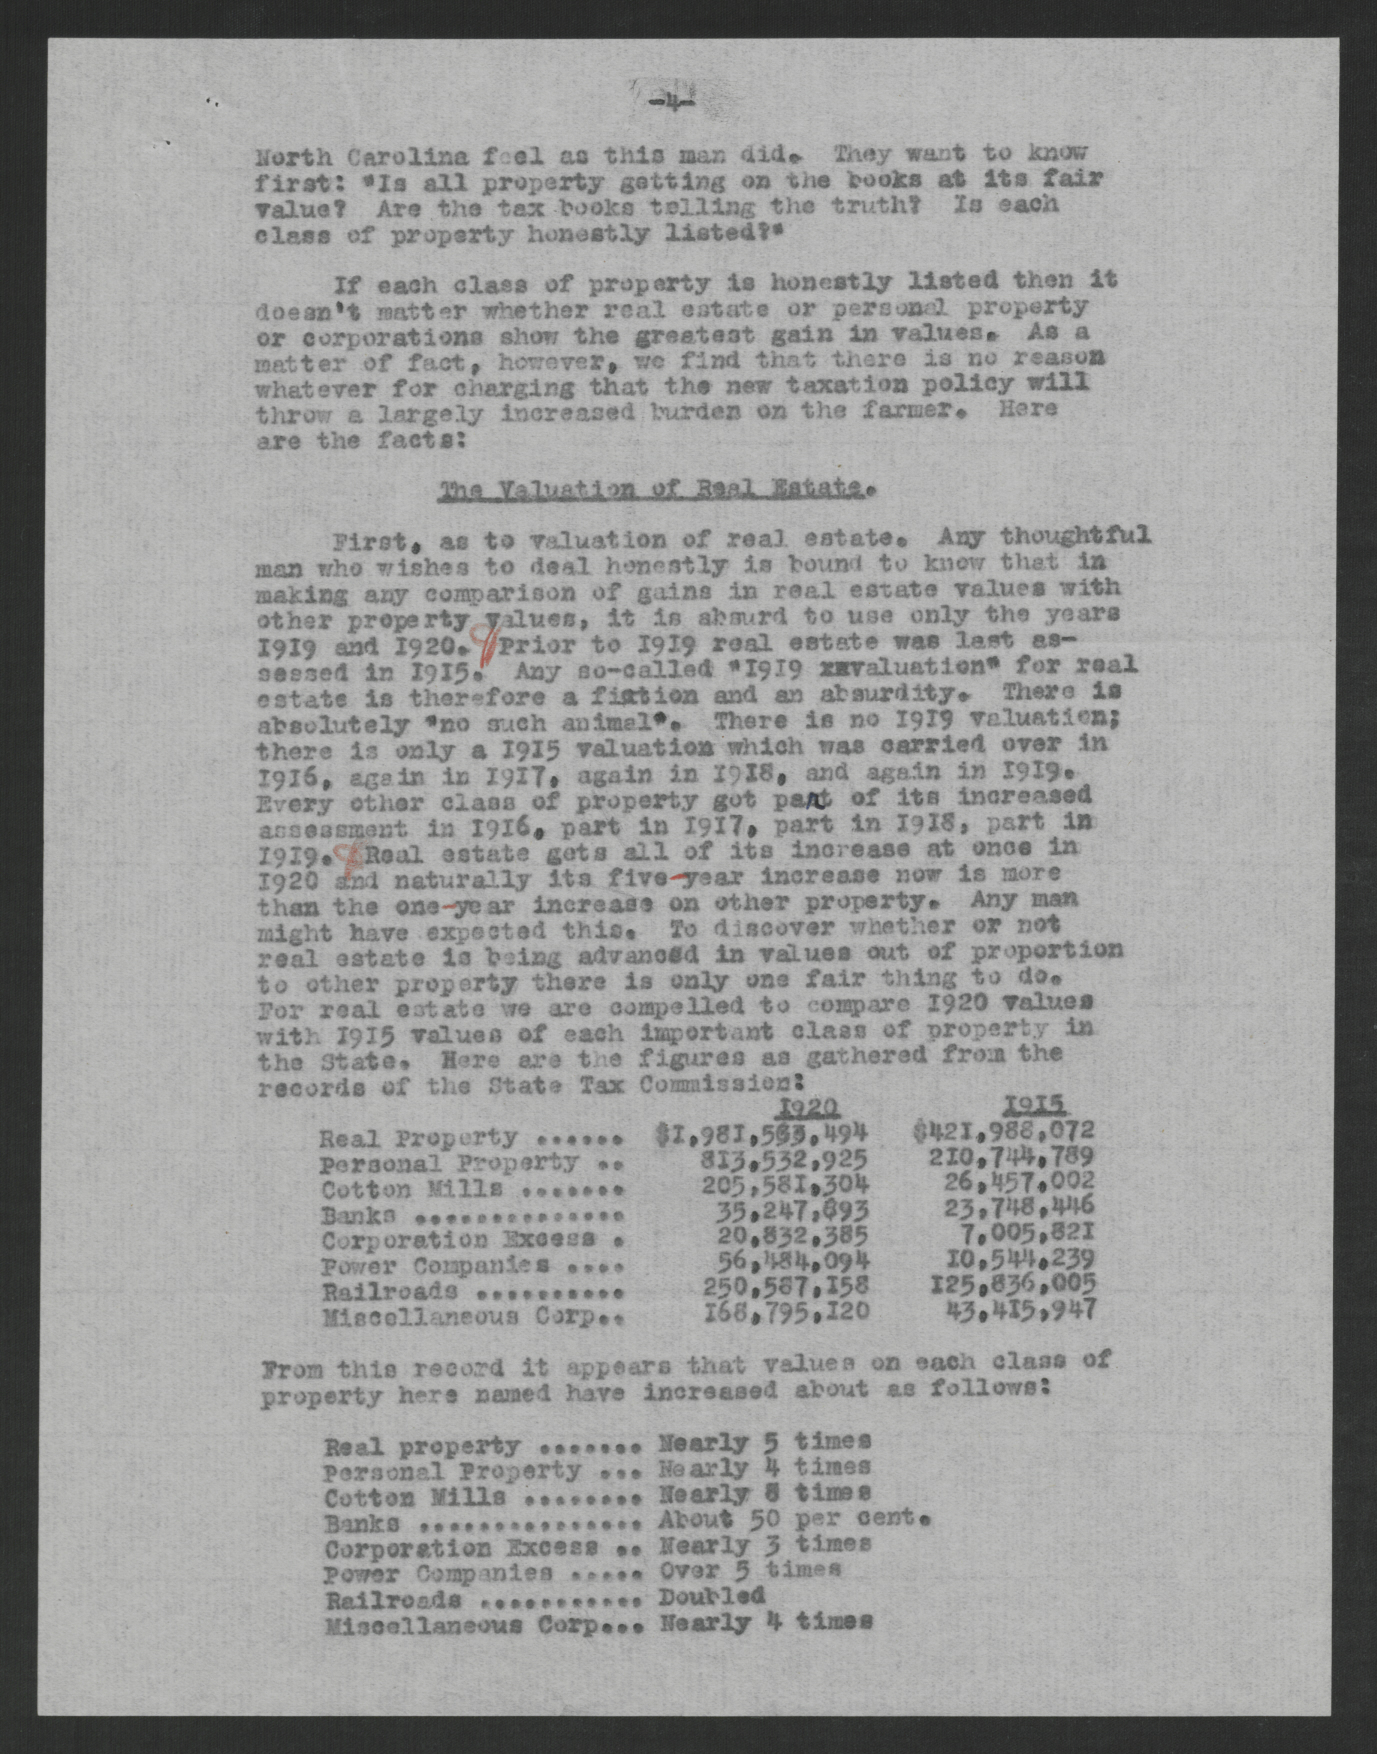 Report of the Legislative Committee of the North Carolina State Board of Agriculture, August 18, 1920, page 4